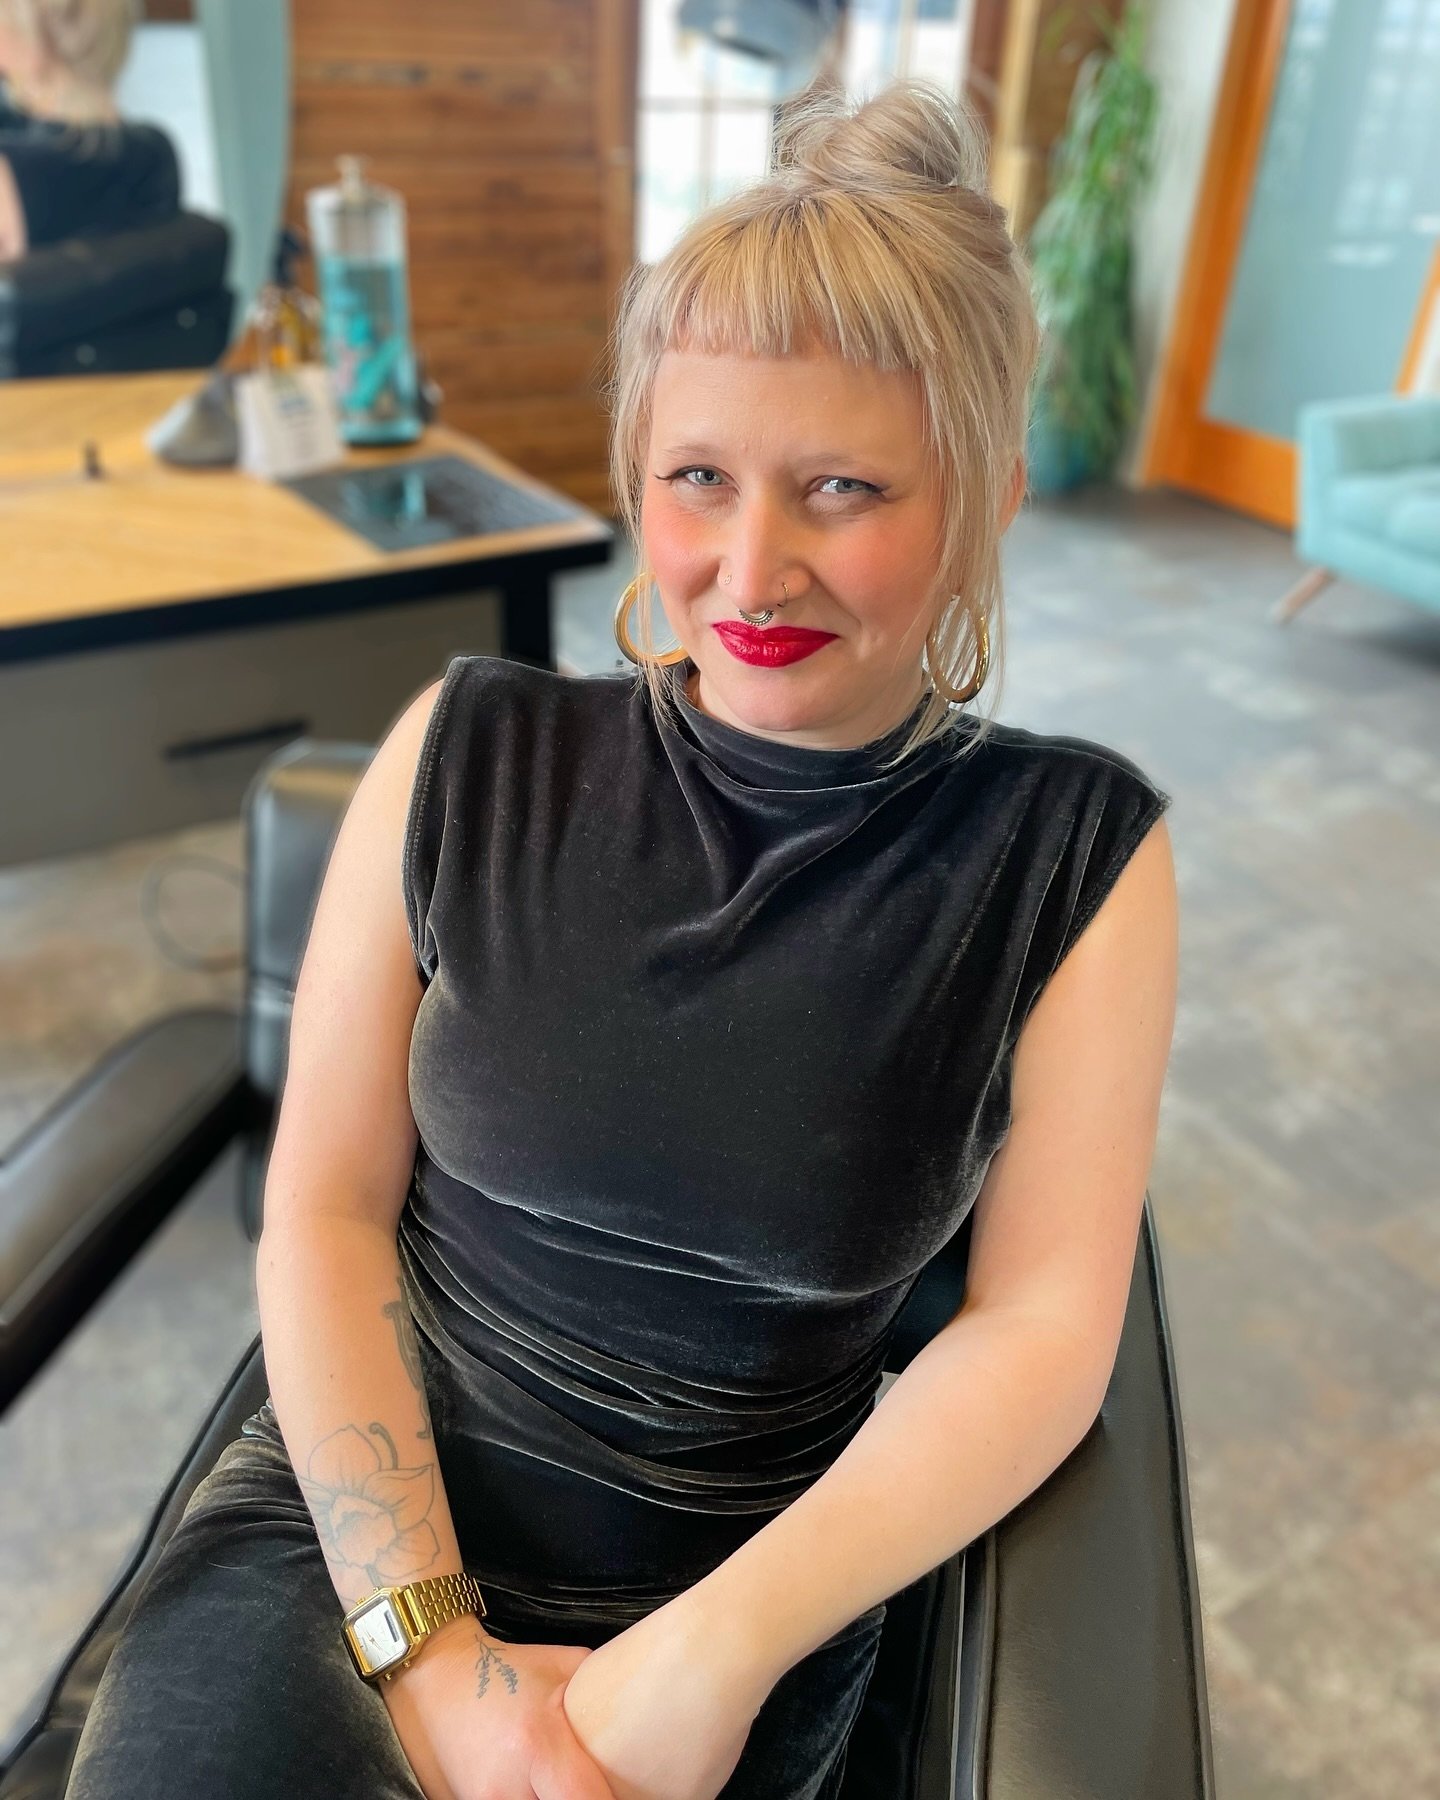 🚨 NEW STYLIST ALERT!!!🚨 

Meet the amazing, Wren! She began with us as an extern, and it was a perfect fit! We can&rsquo;t wait for you guys to meet her!

Wren is a history nerd, mother of teens tiny dog/Bravo fanatic with a passion for real good c